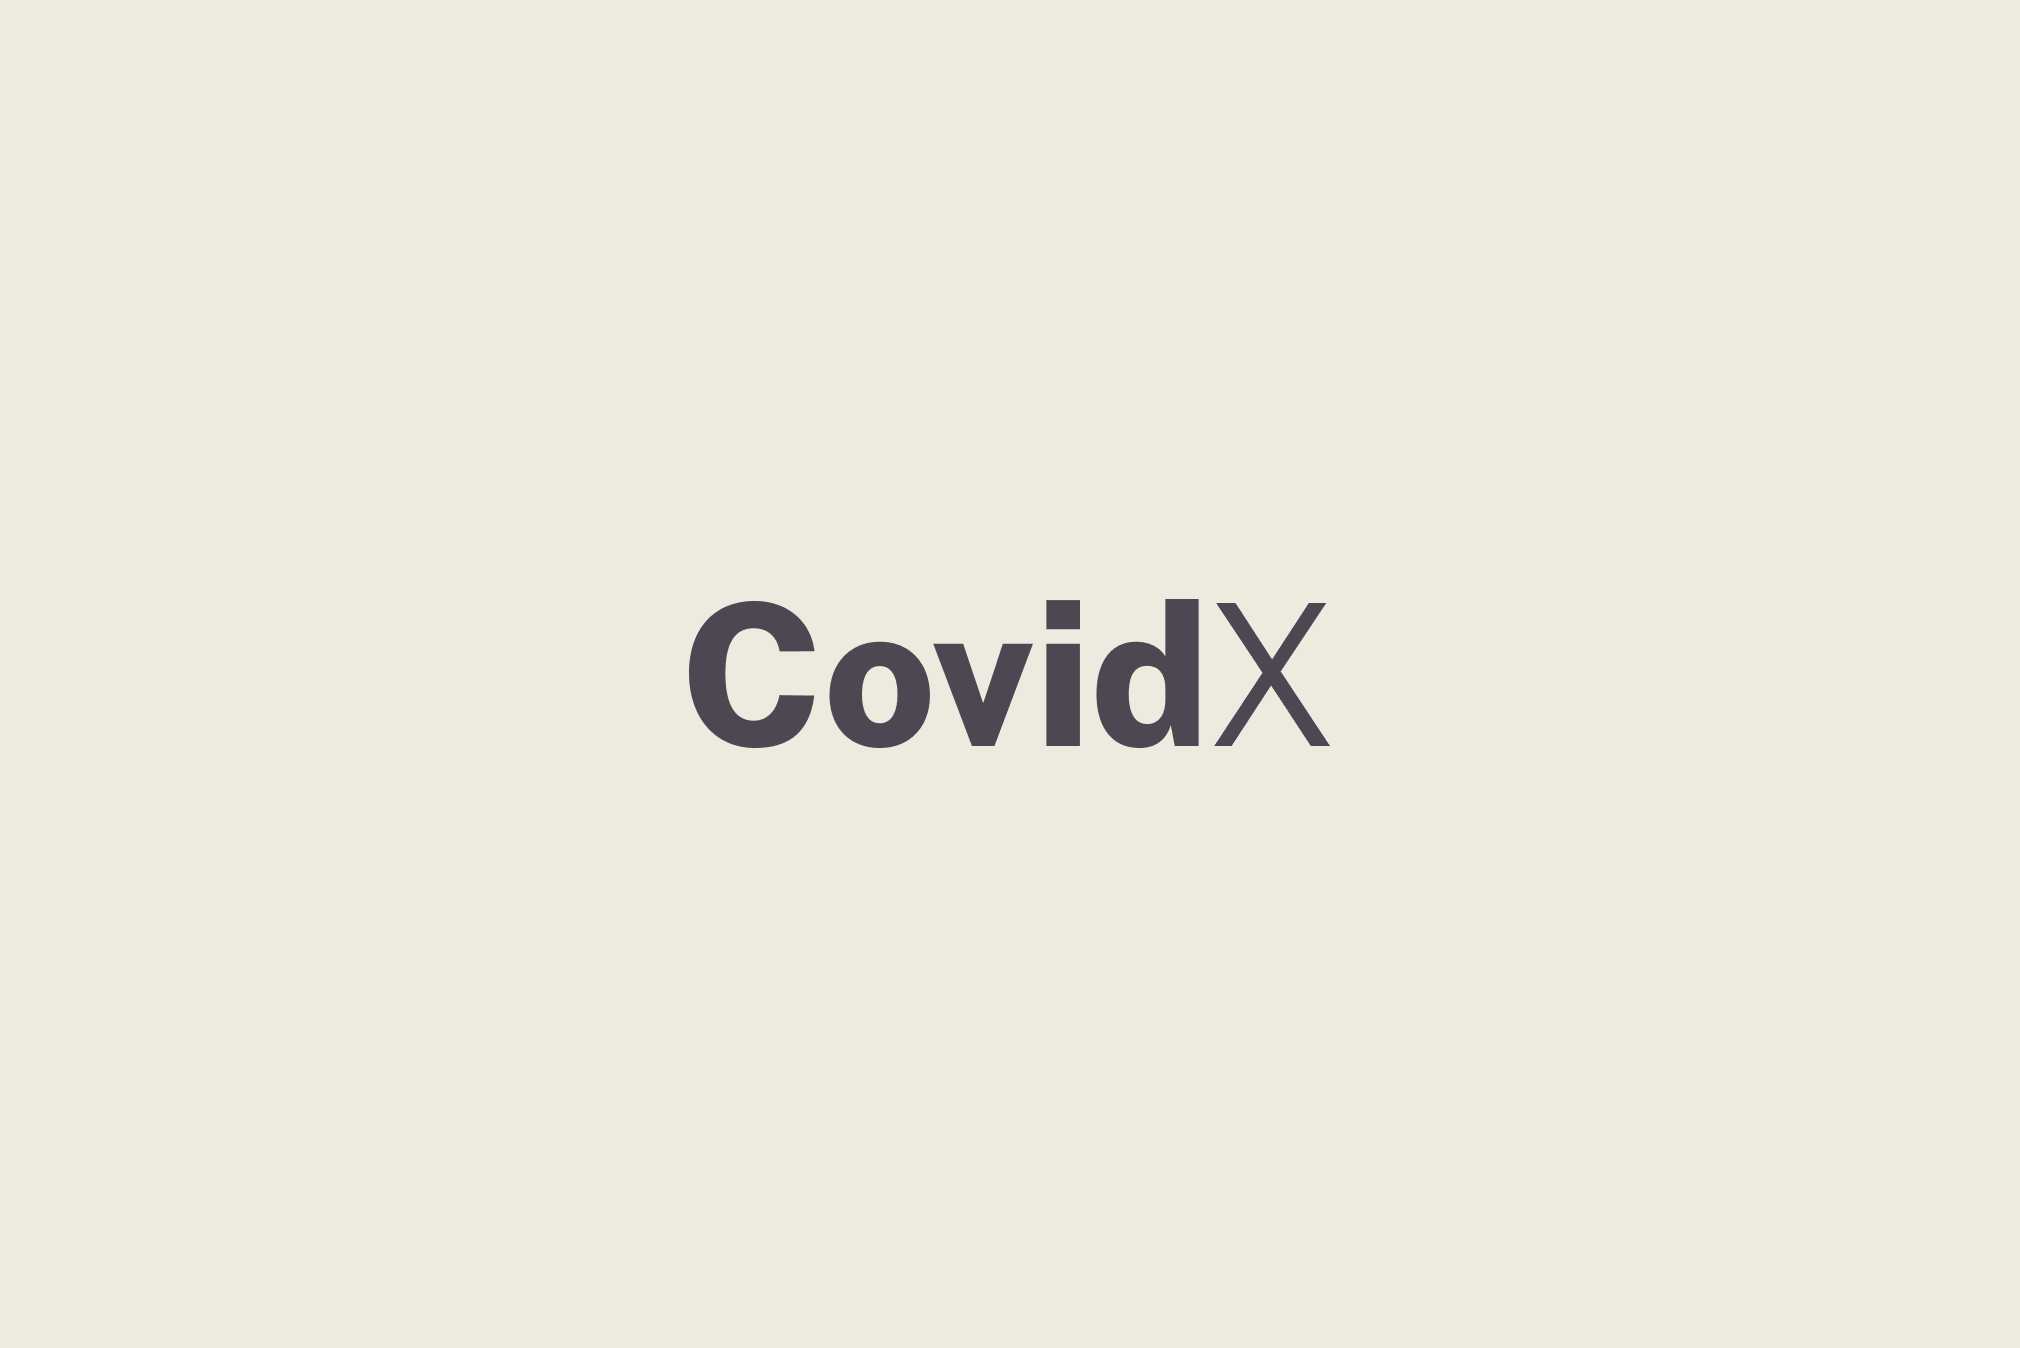 CovidX: a new look and a new way forward